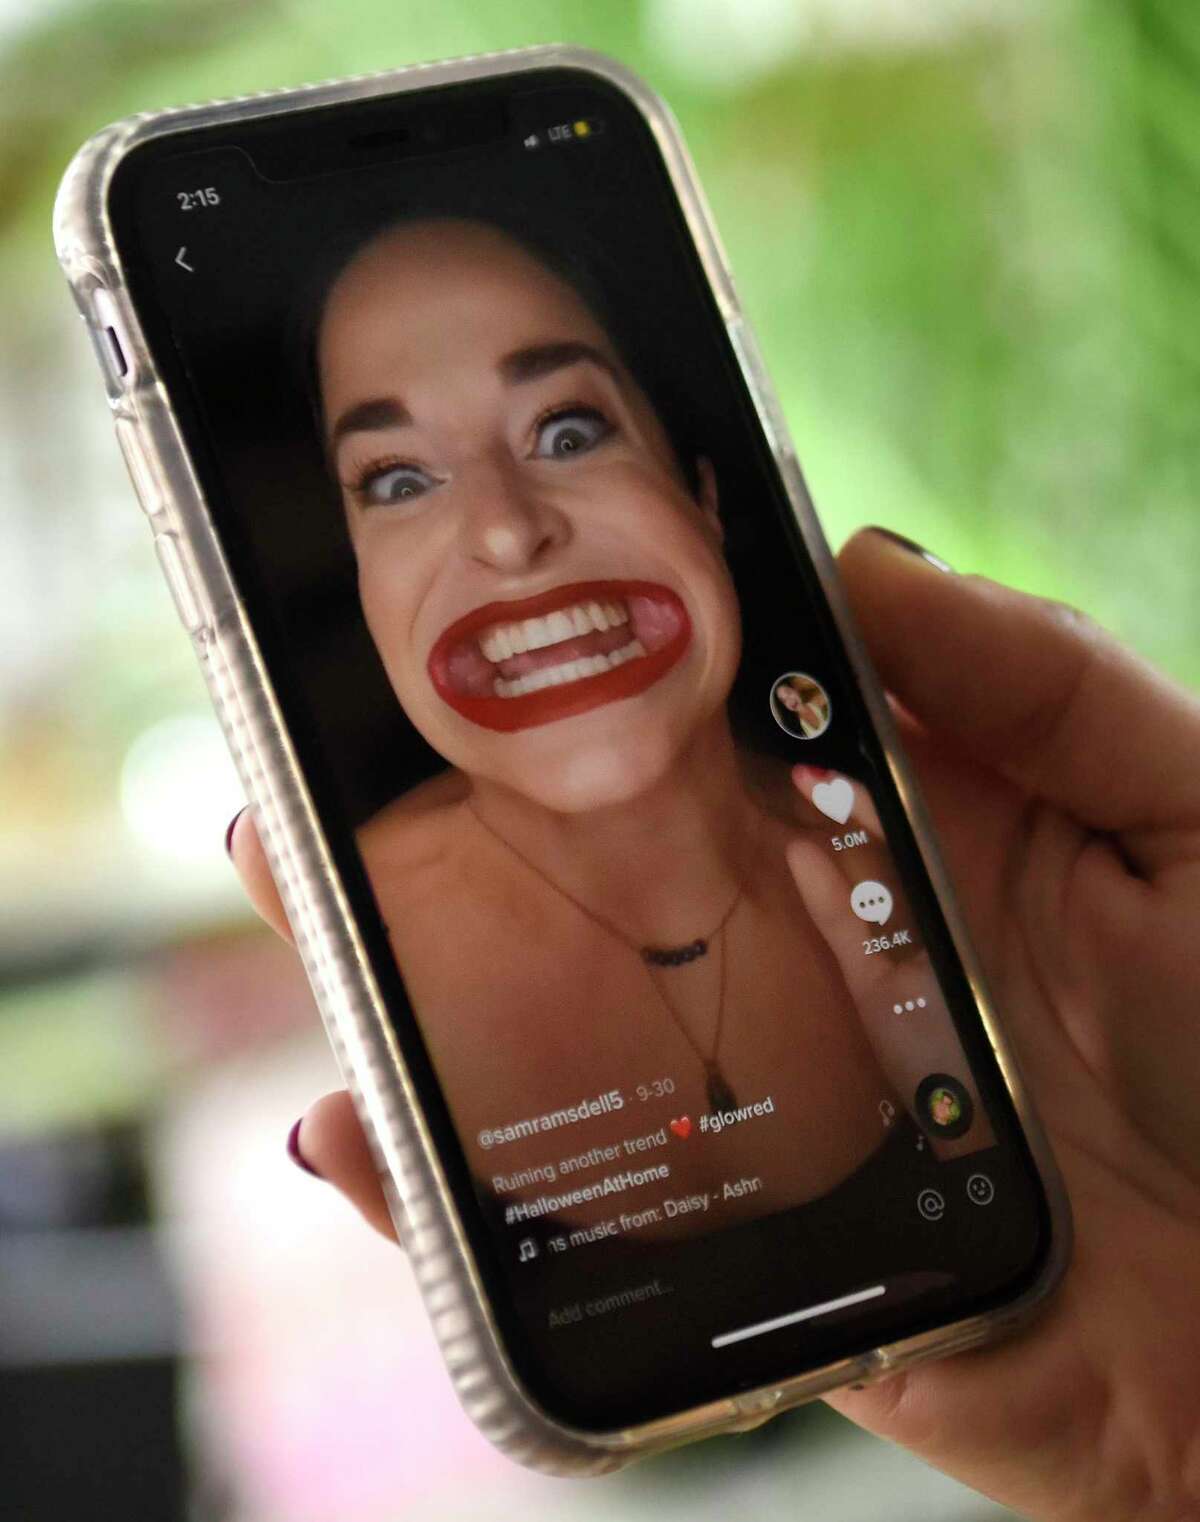 TikTok star Samantha Ramsdell plays her most viewed TikTok video on her phone at her home in Stamford, Conn. Tuesday, Oct. 27, 2020. Ramsdell has amassed more than 500,000 followers on TikTok under the user name @samramsdell5 since pivoting to the mobile video app early in the pandemic.